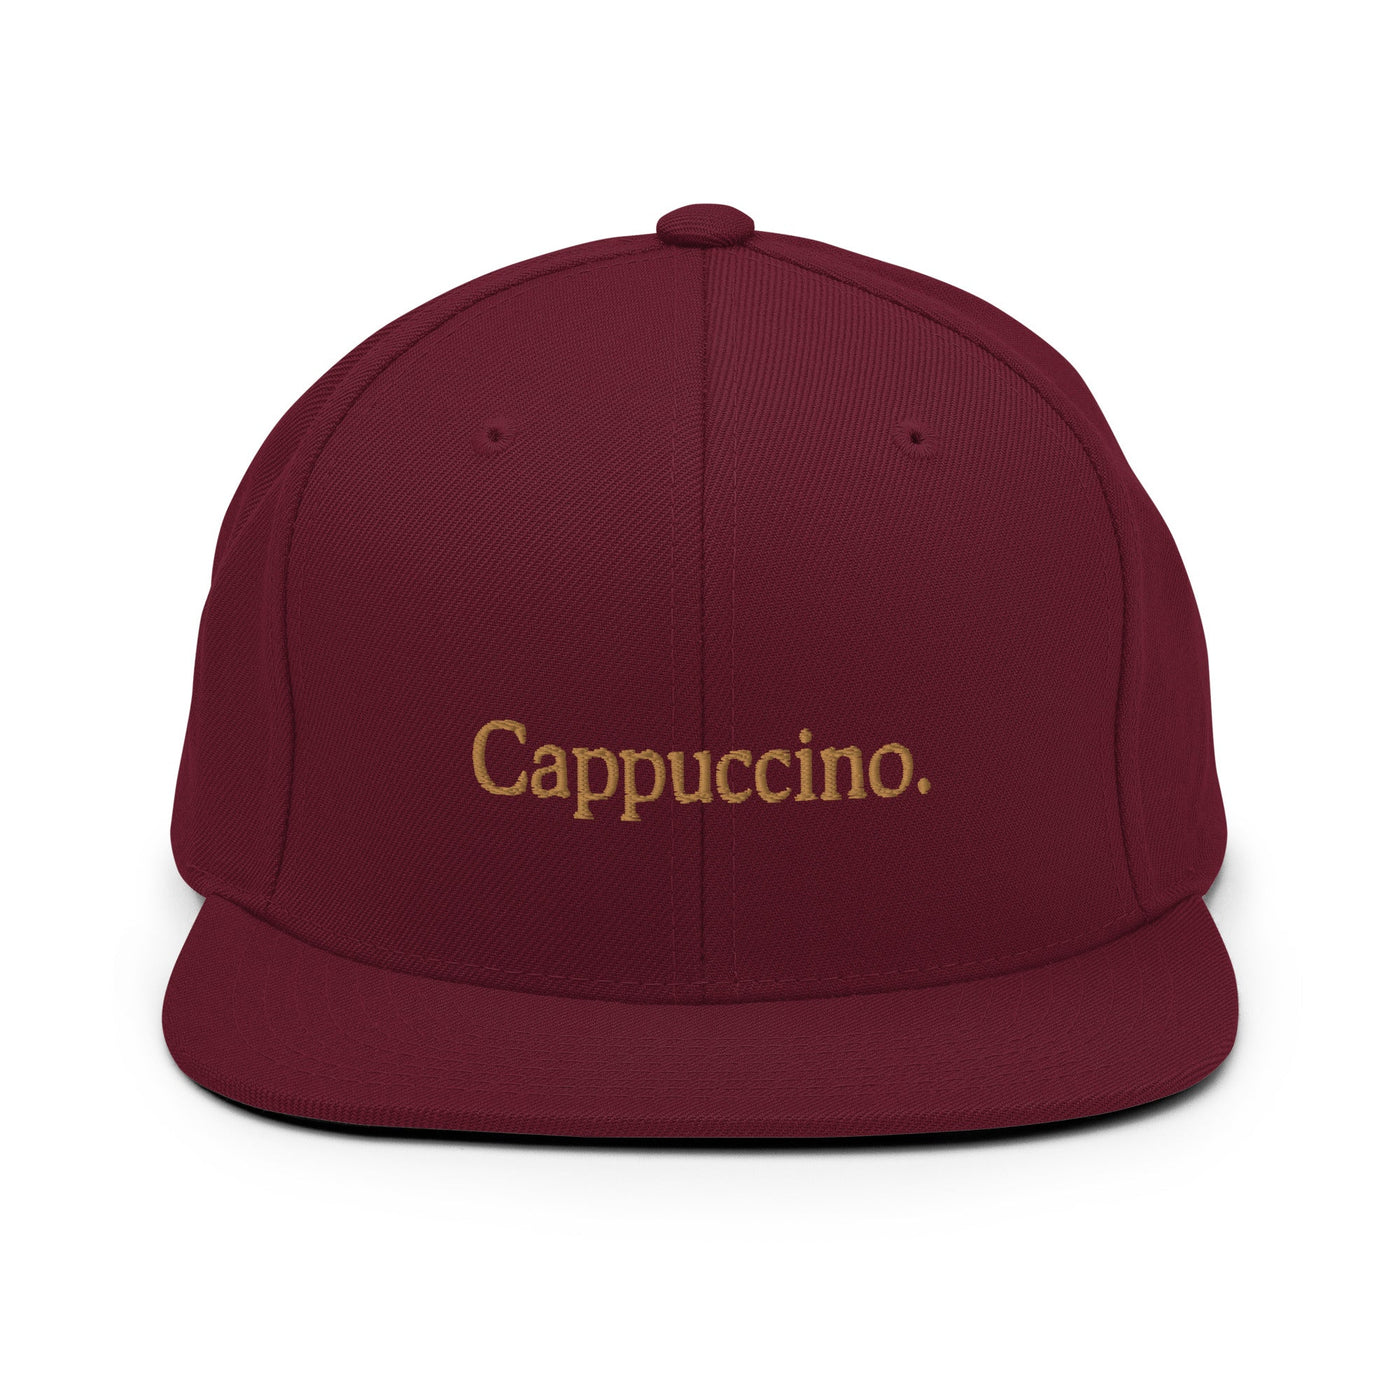 Cappuccino. Snapback Hat - Maroon - - Just Another Cap Store